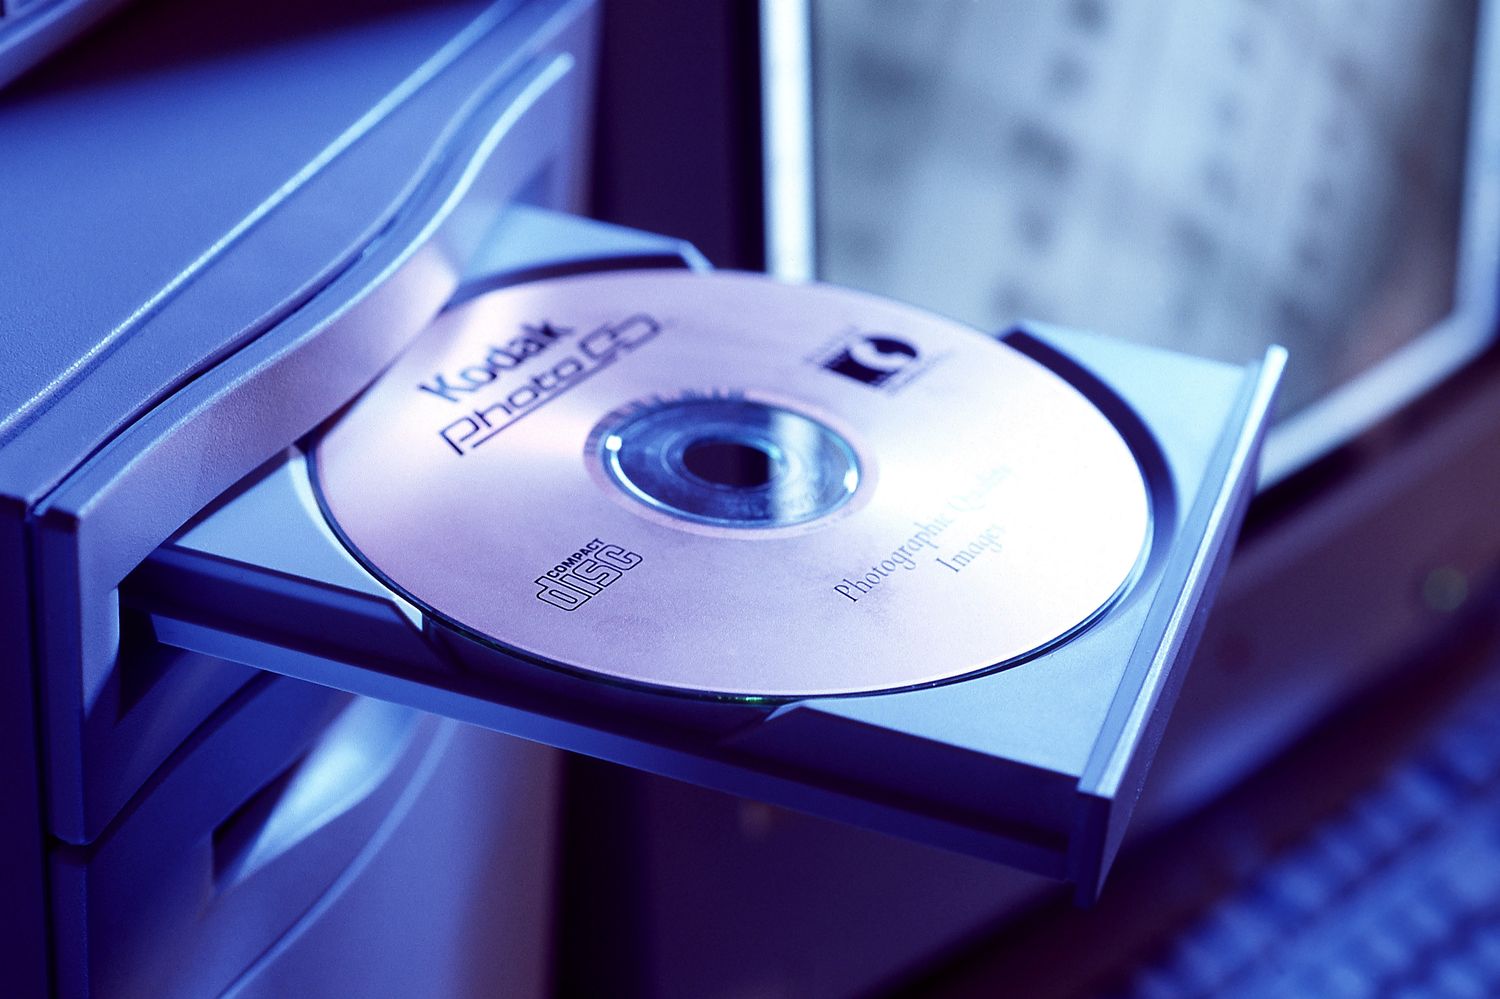 When You Purchase Digital Music, Are You Allowed To Burn It Onto A CD?